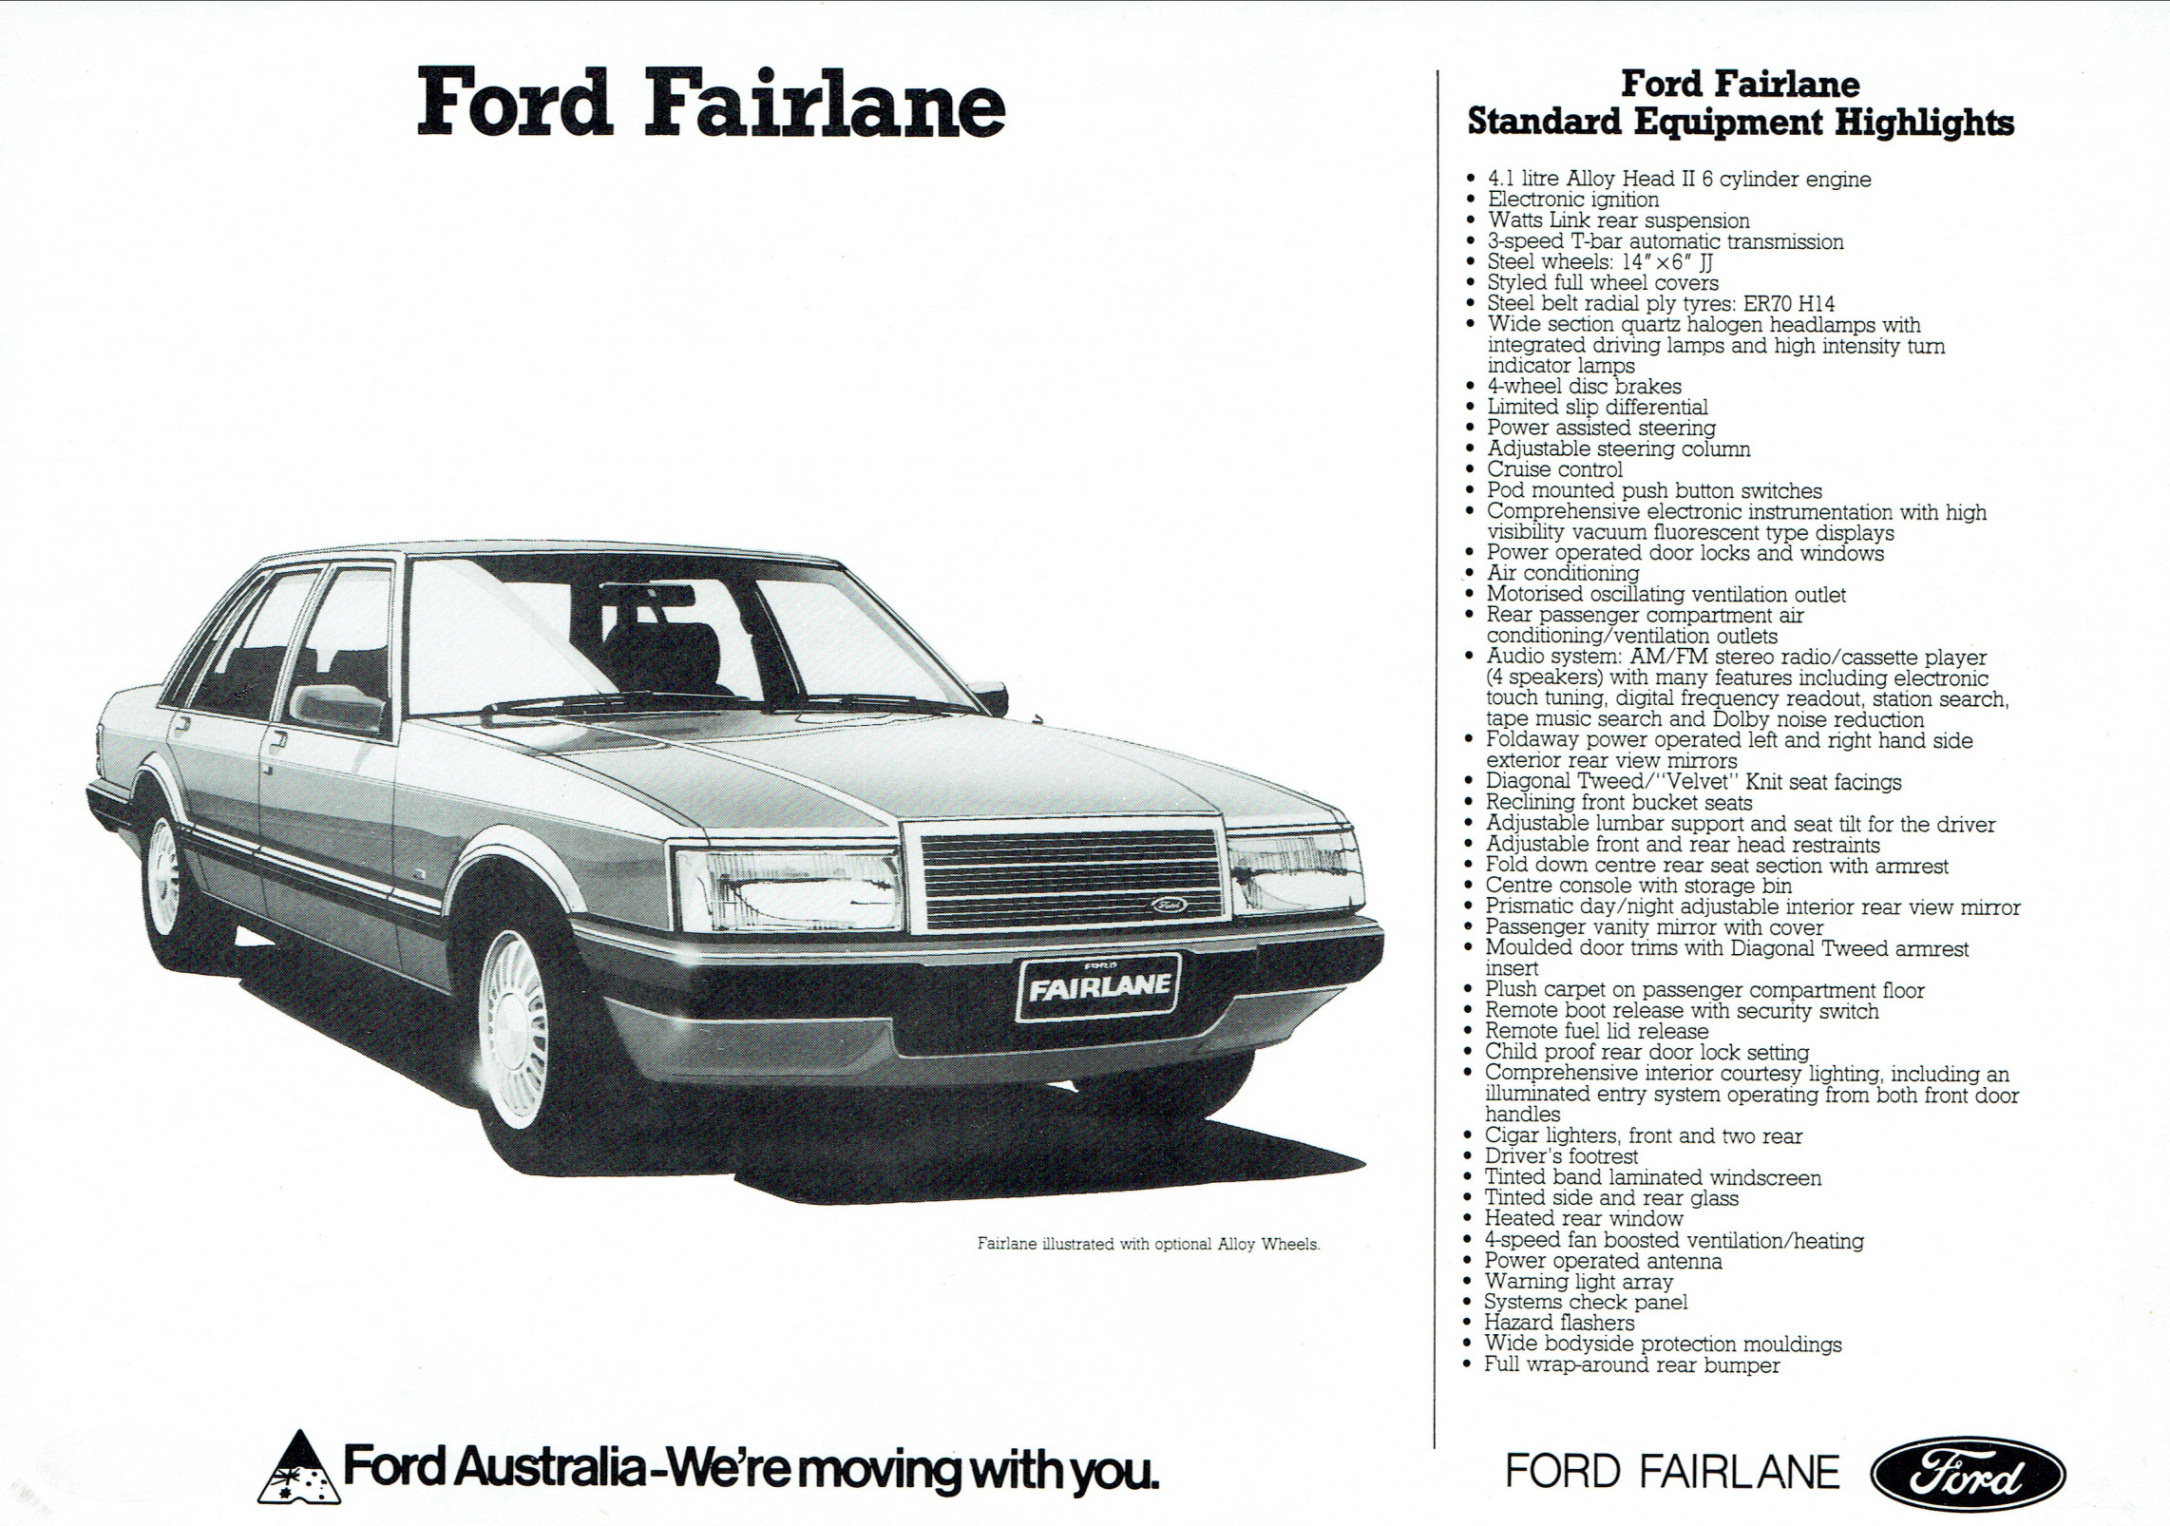 1984_Ford_ZL_Fairlane-S01